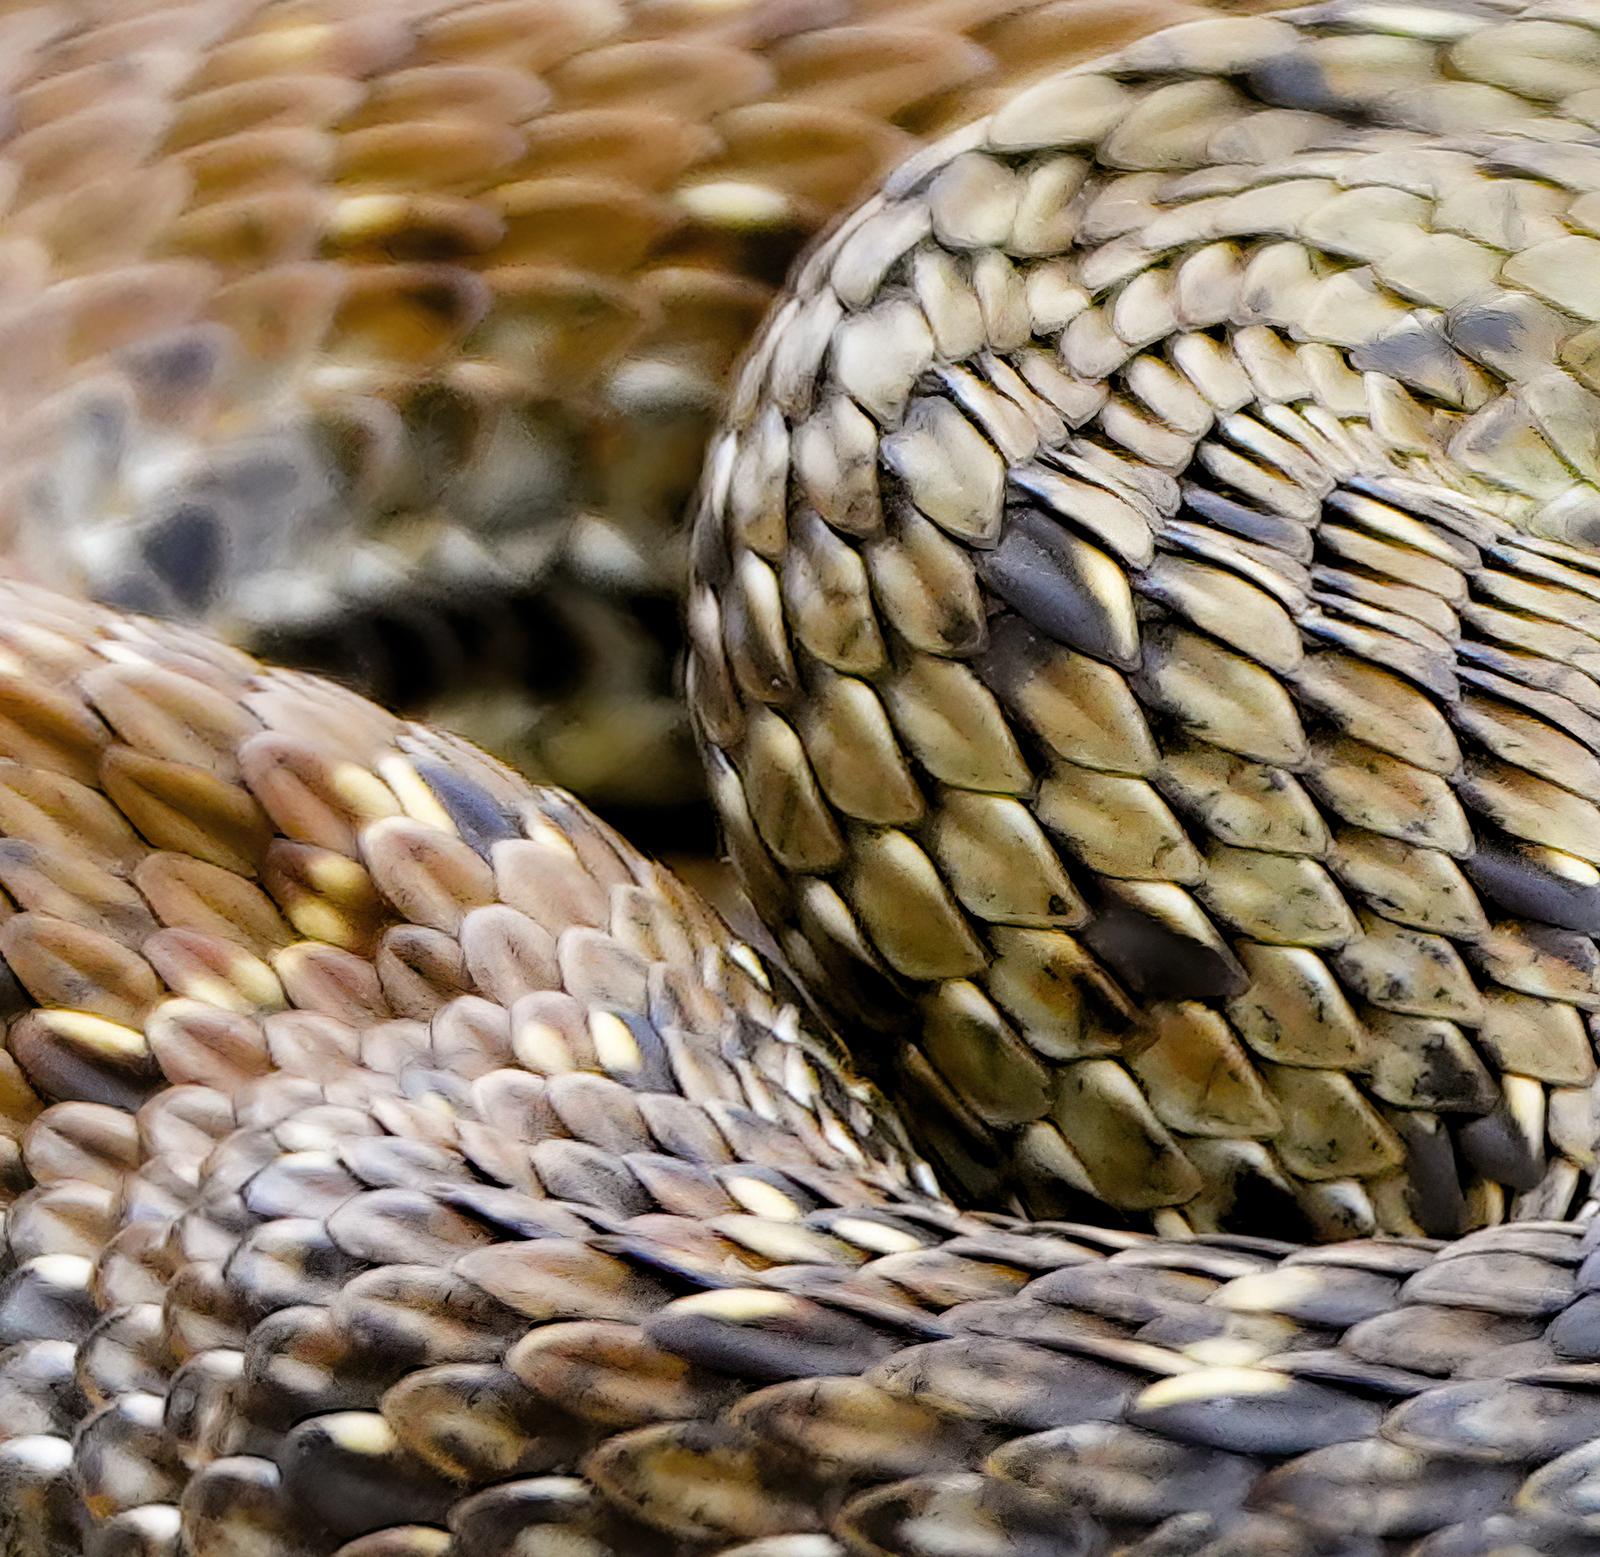 Snake  - Signed limited edition archival pigment print, 2023  -  Edition of 8
Detail of a snake in its natural habitat.

Close-up on the head and body of the reptile which looks at you with a piercing eye, details and colour tones are also